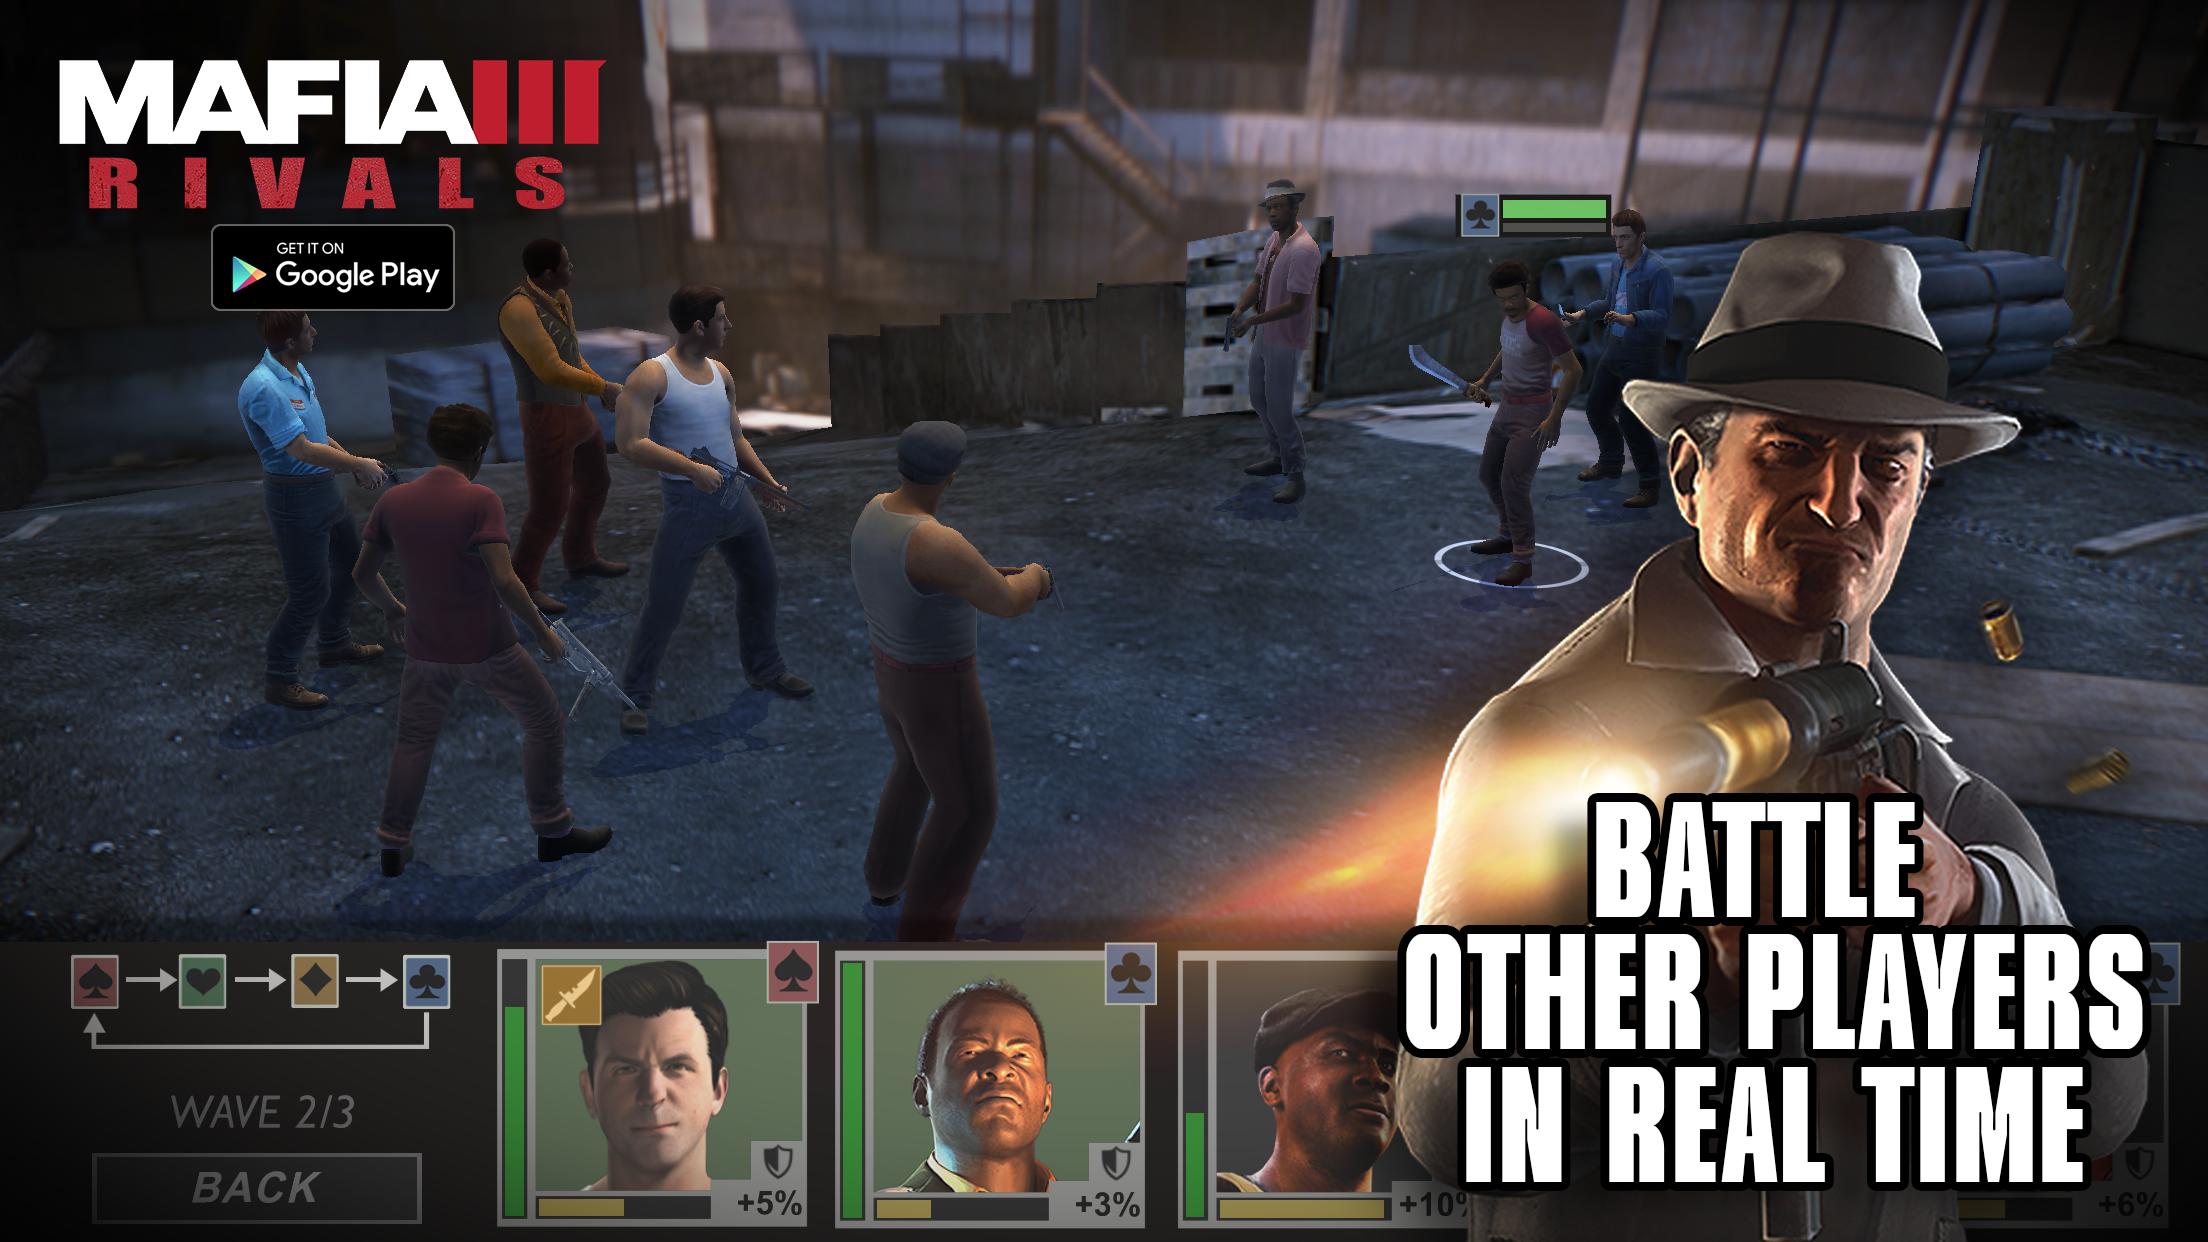 Mafia III: Rivals for Android - APK Download - 